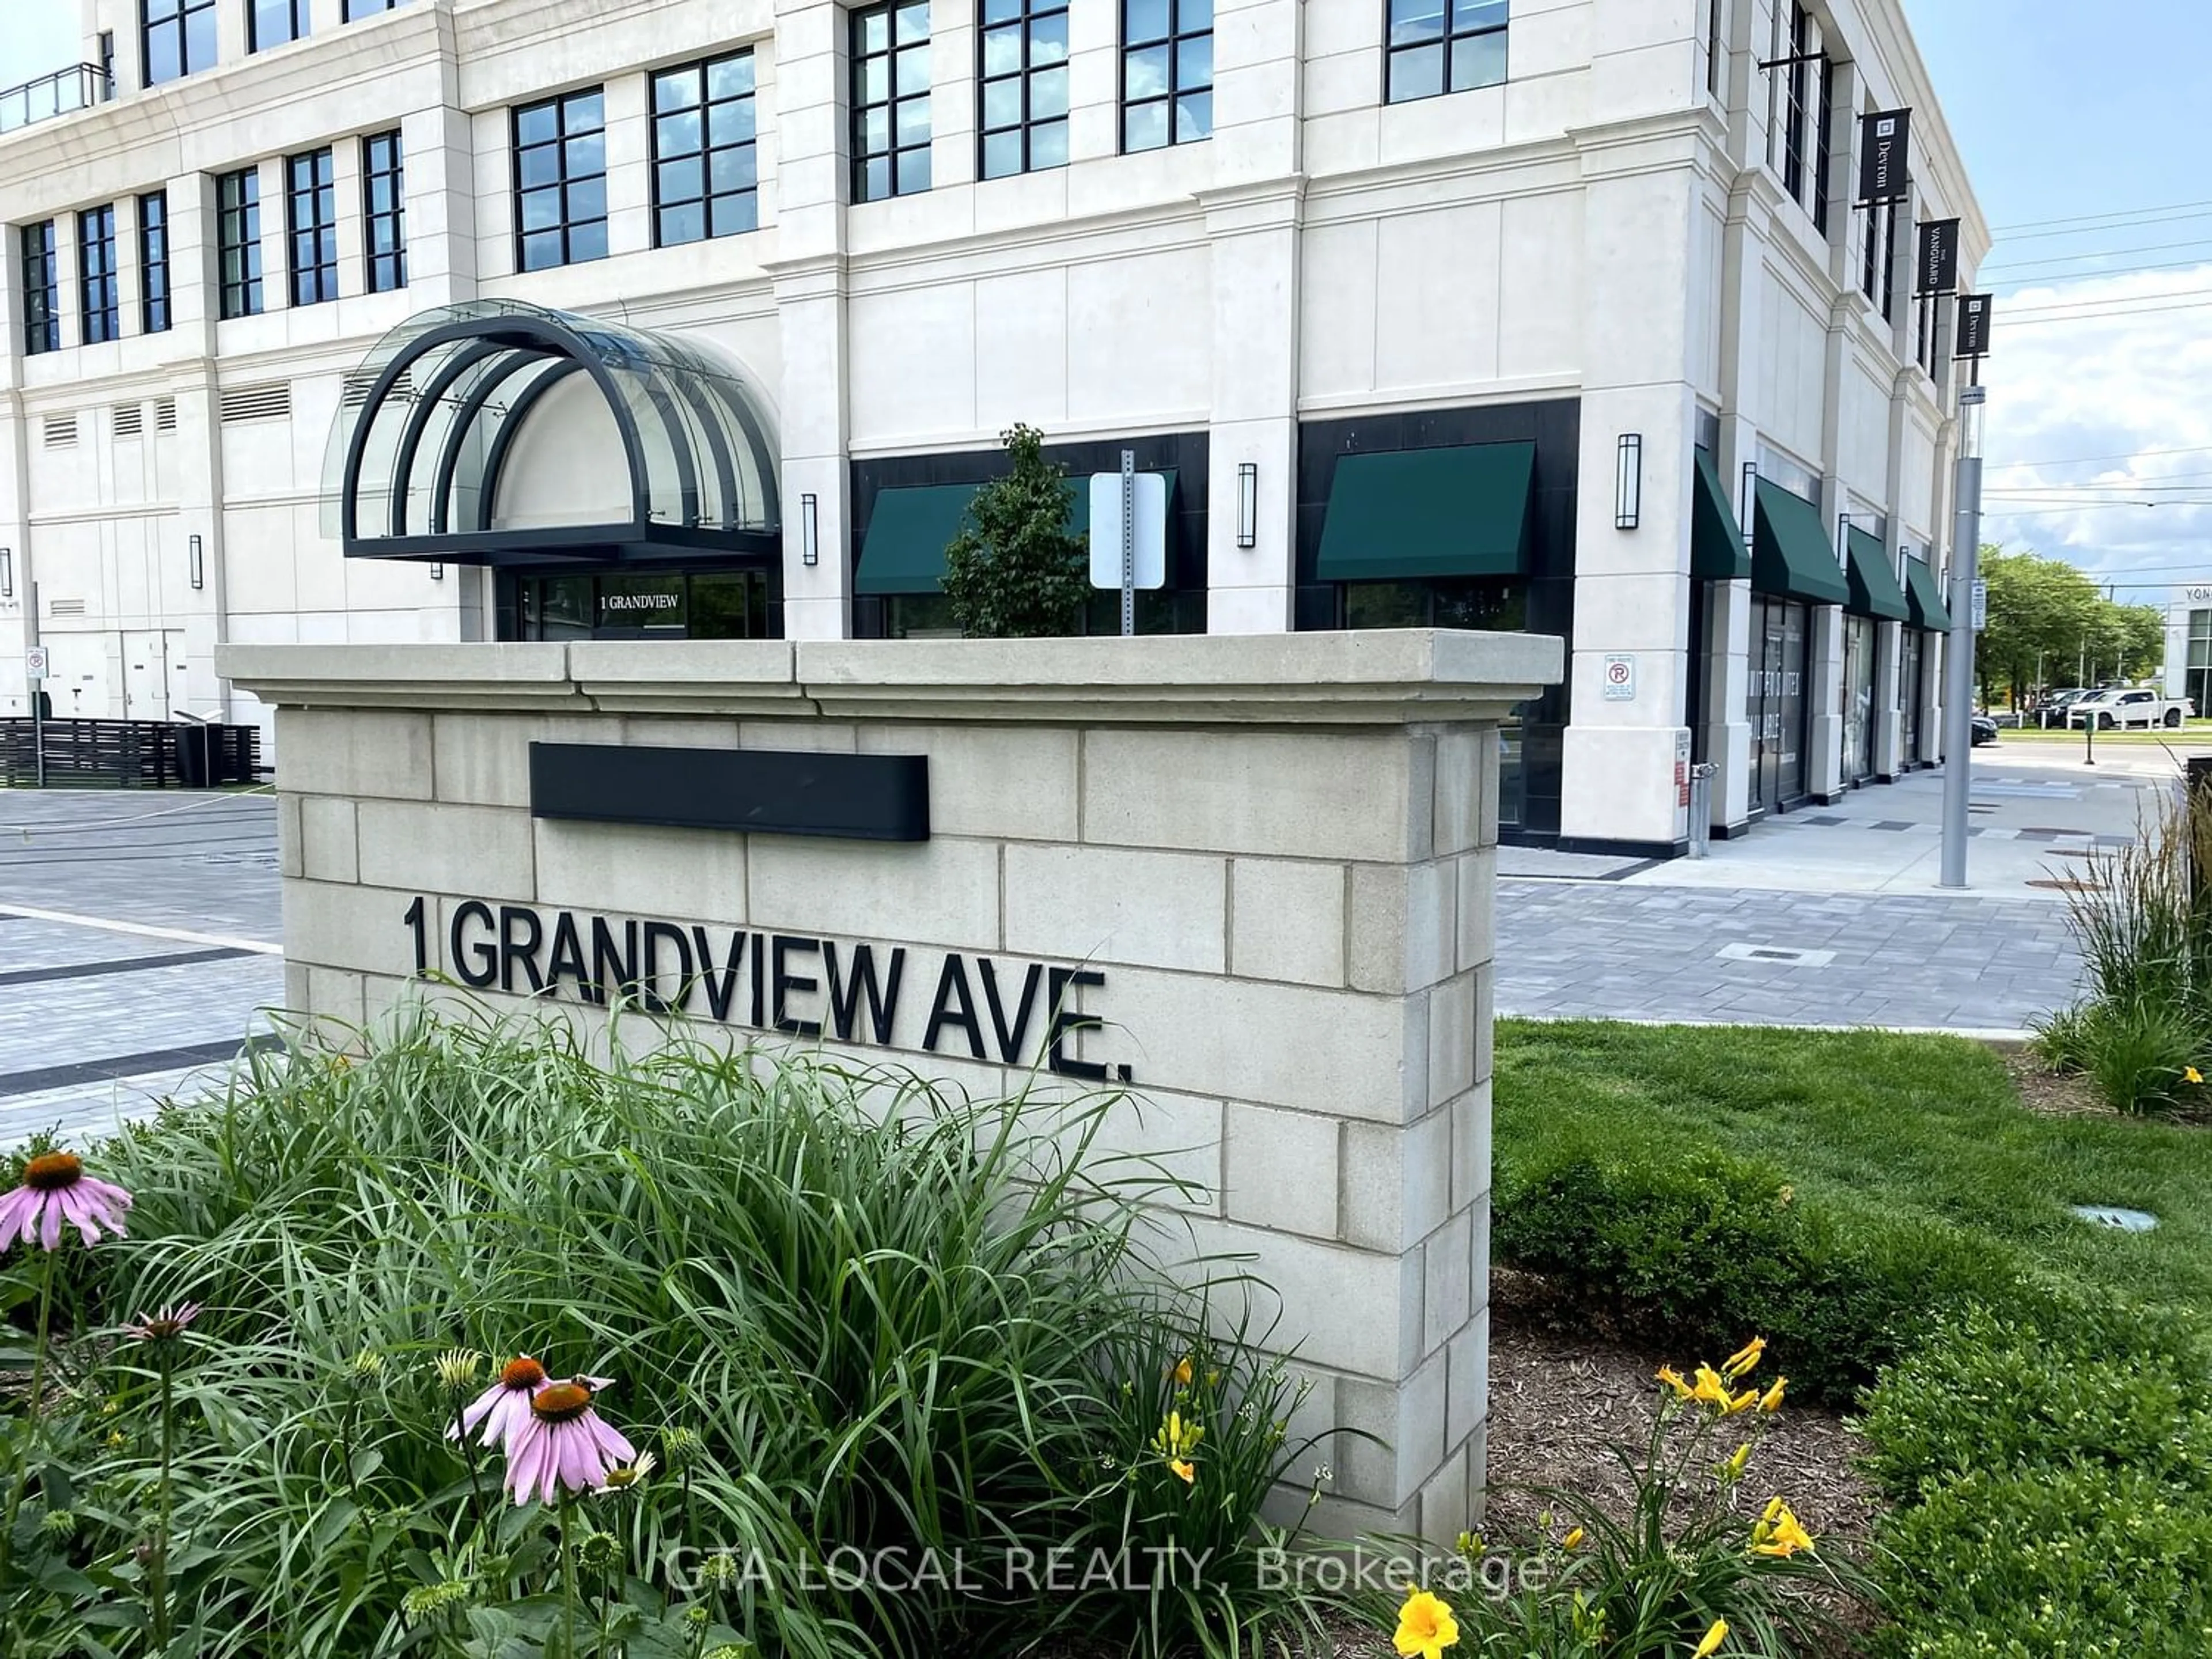 Lakeview for 1 Grandview Ave #503, Markham Ontario L3T 0G7